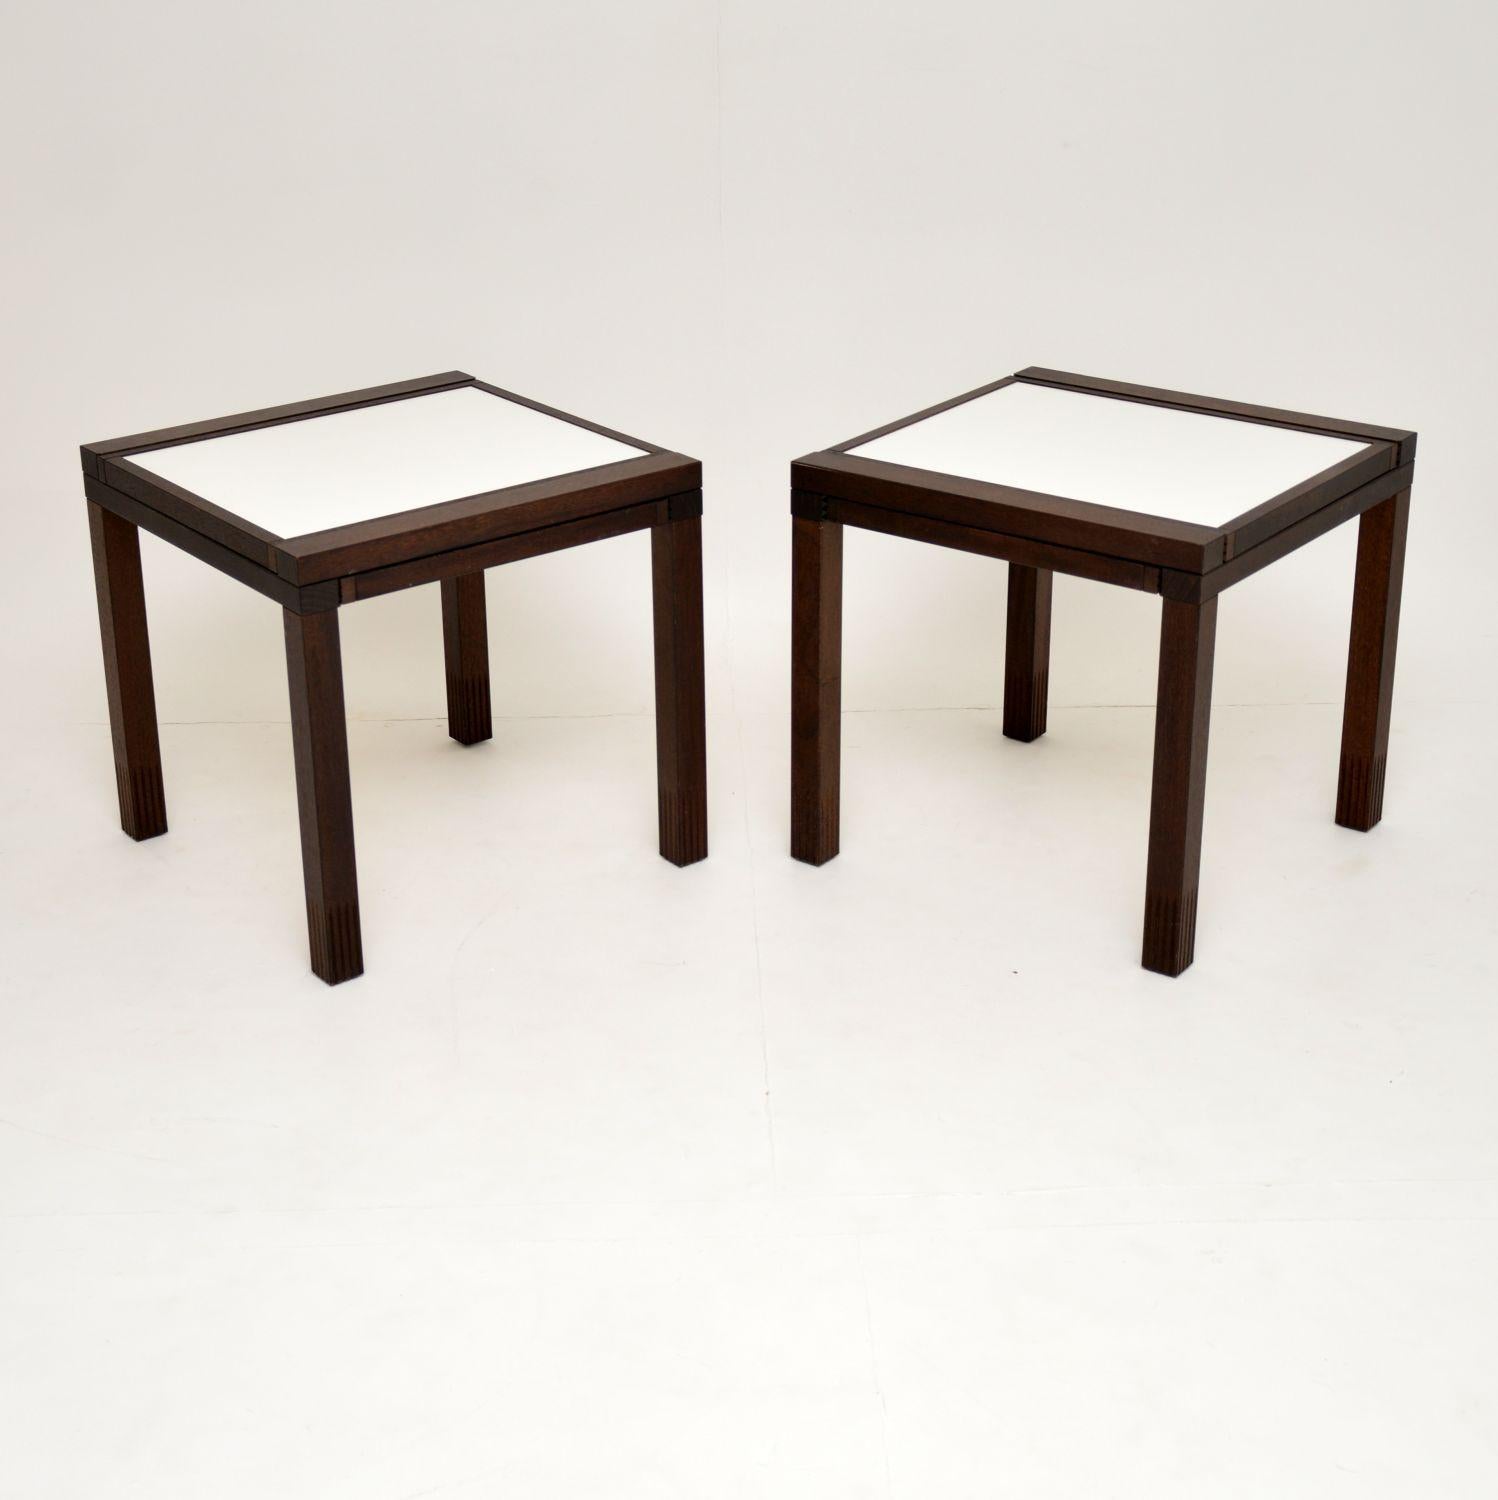 A stunning and very rare pair of vintage ‘Hexa’ side tables, these were designed by Bernard Vuarnesson. They were made in Italy during the 1980’s by Bellato. These are made from solid wood, each has two separate white formica tops that slide out at